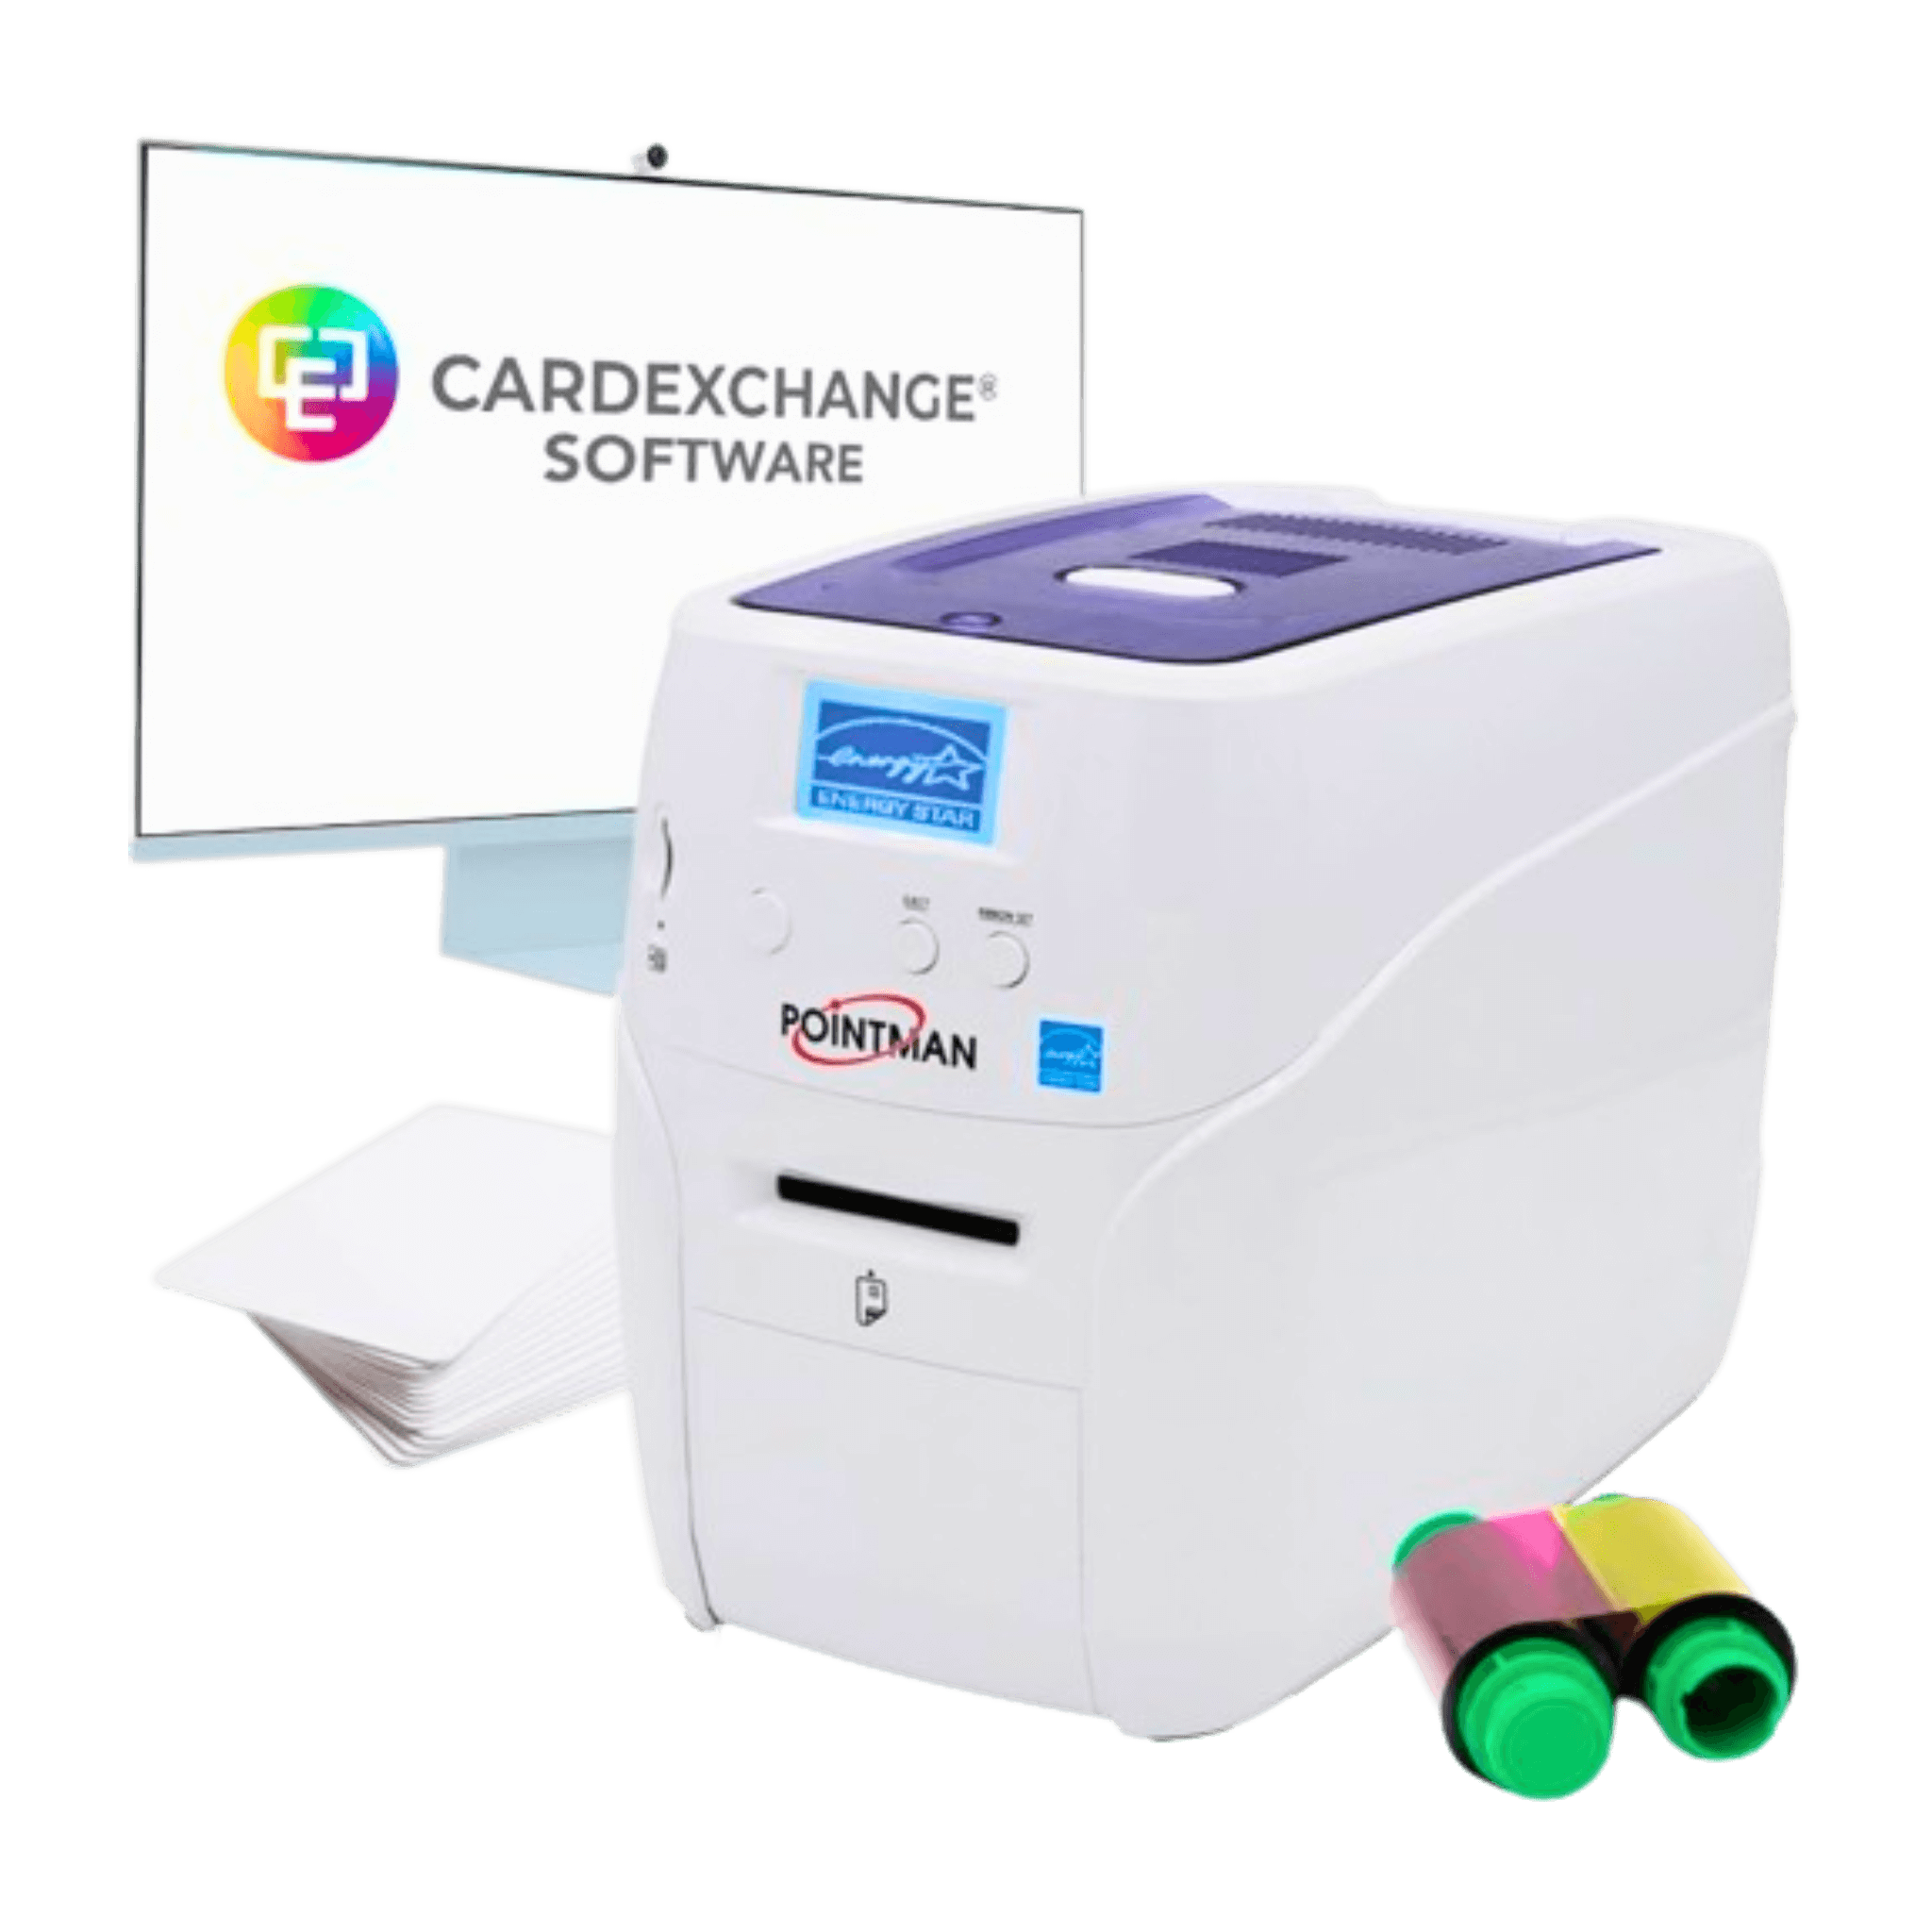 Pointman Nuvia N10 ID Card Printer Bundle including CardExchange software, ribbon and cards